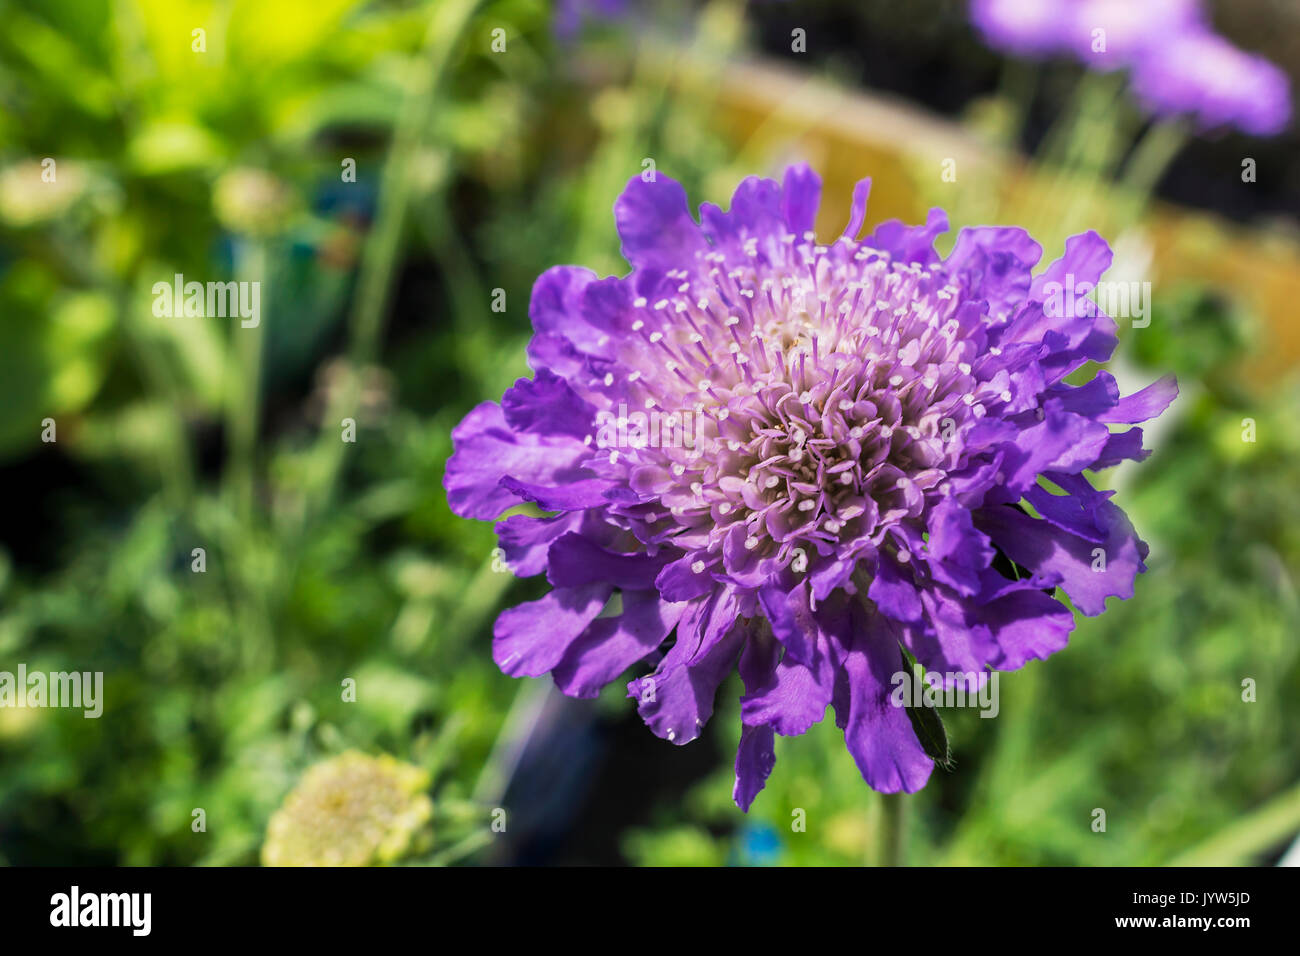 Blue Scabiosa (Pin Cushion flower) flowering plant close-up. Stock Photo